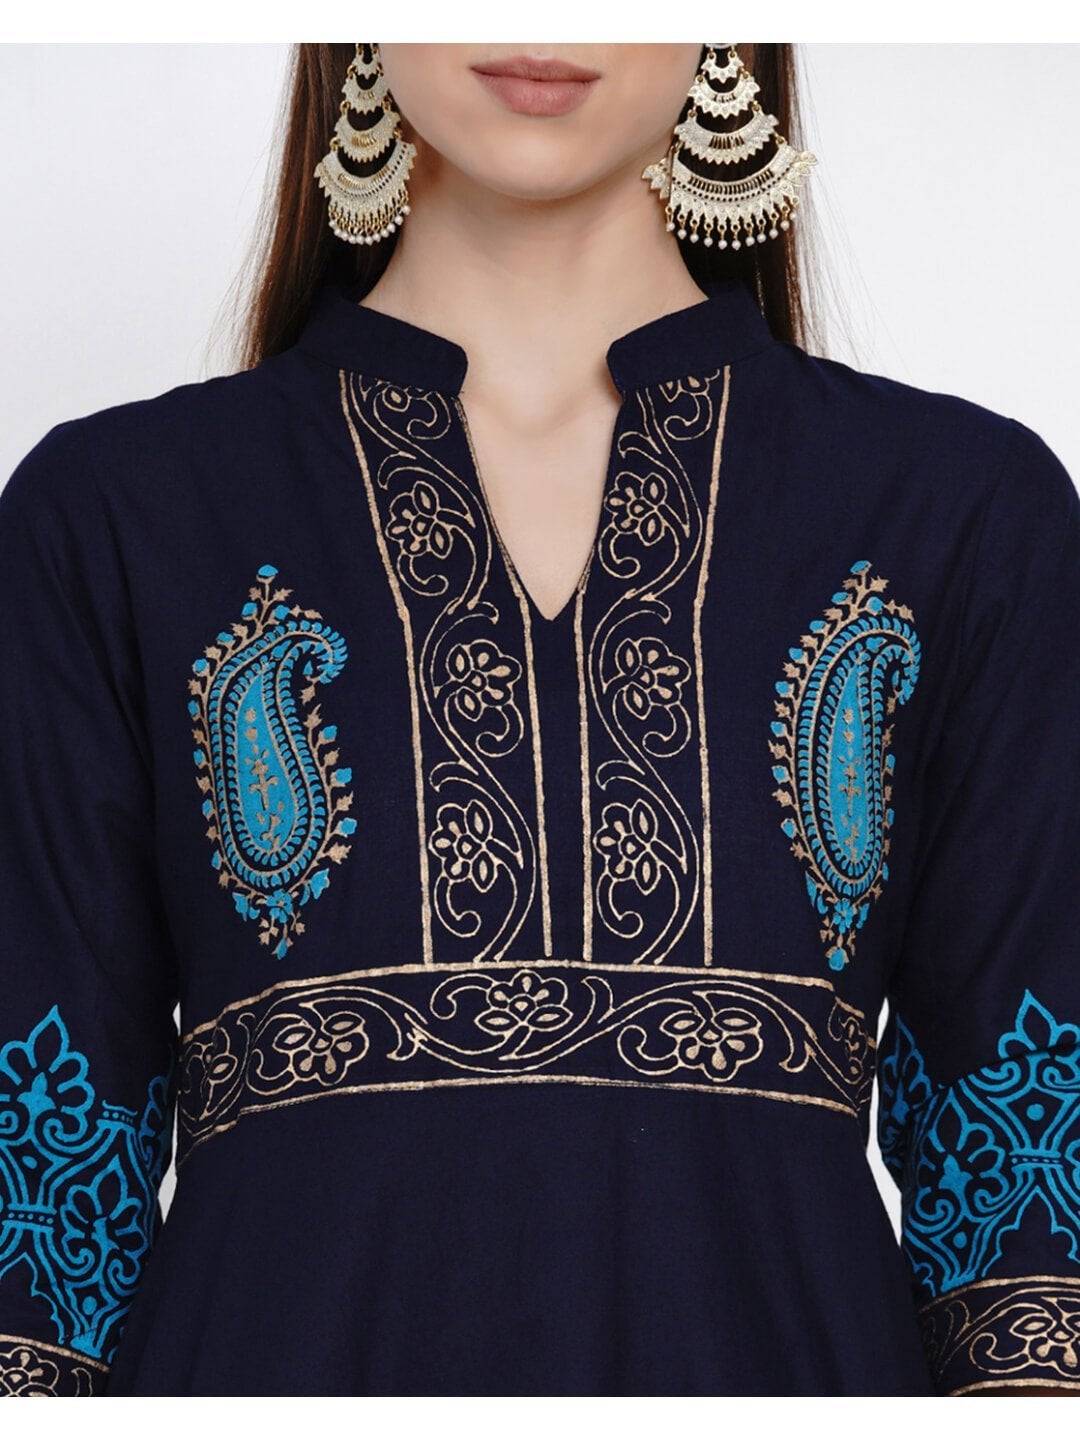 Traditional Coral Blue Cotton Anarkali with Ajrakh Hand Block Print - Inayat